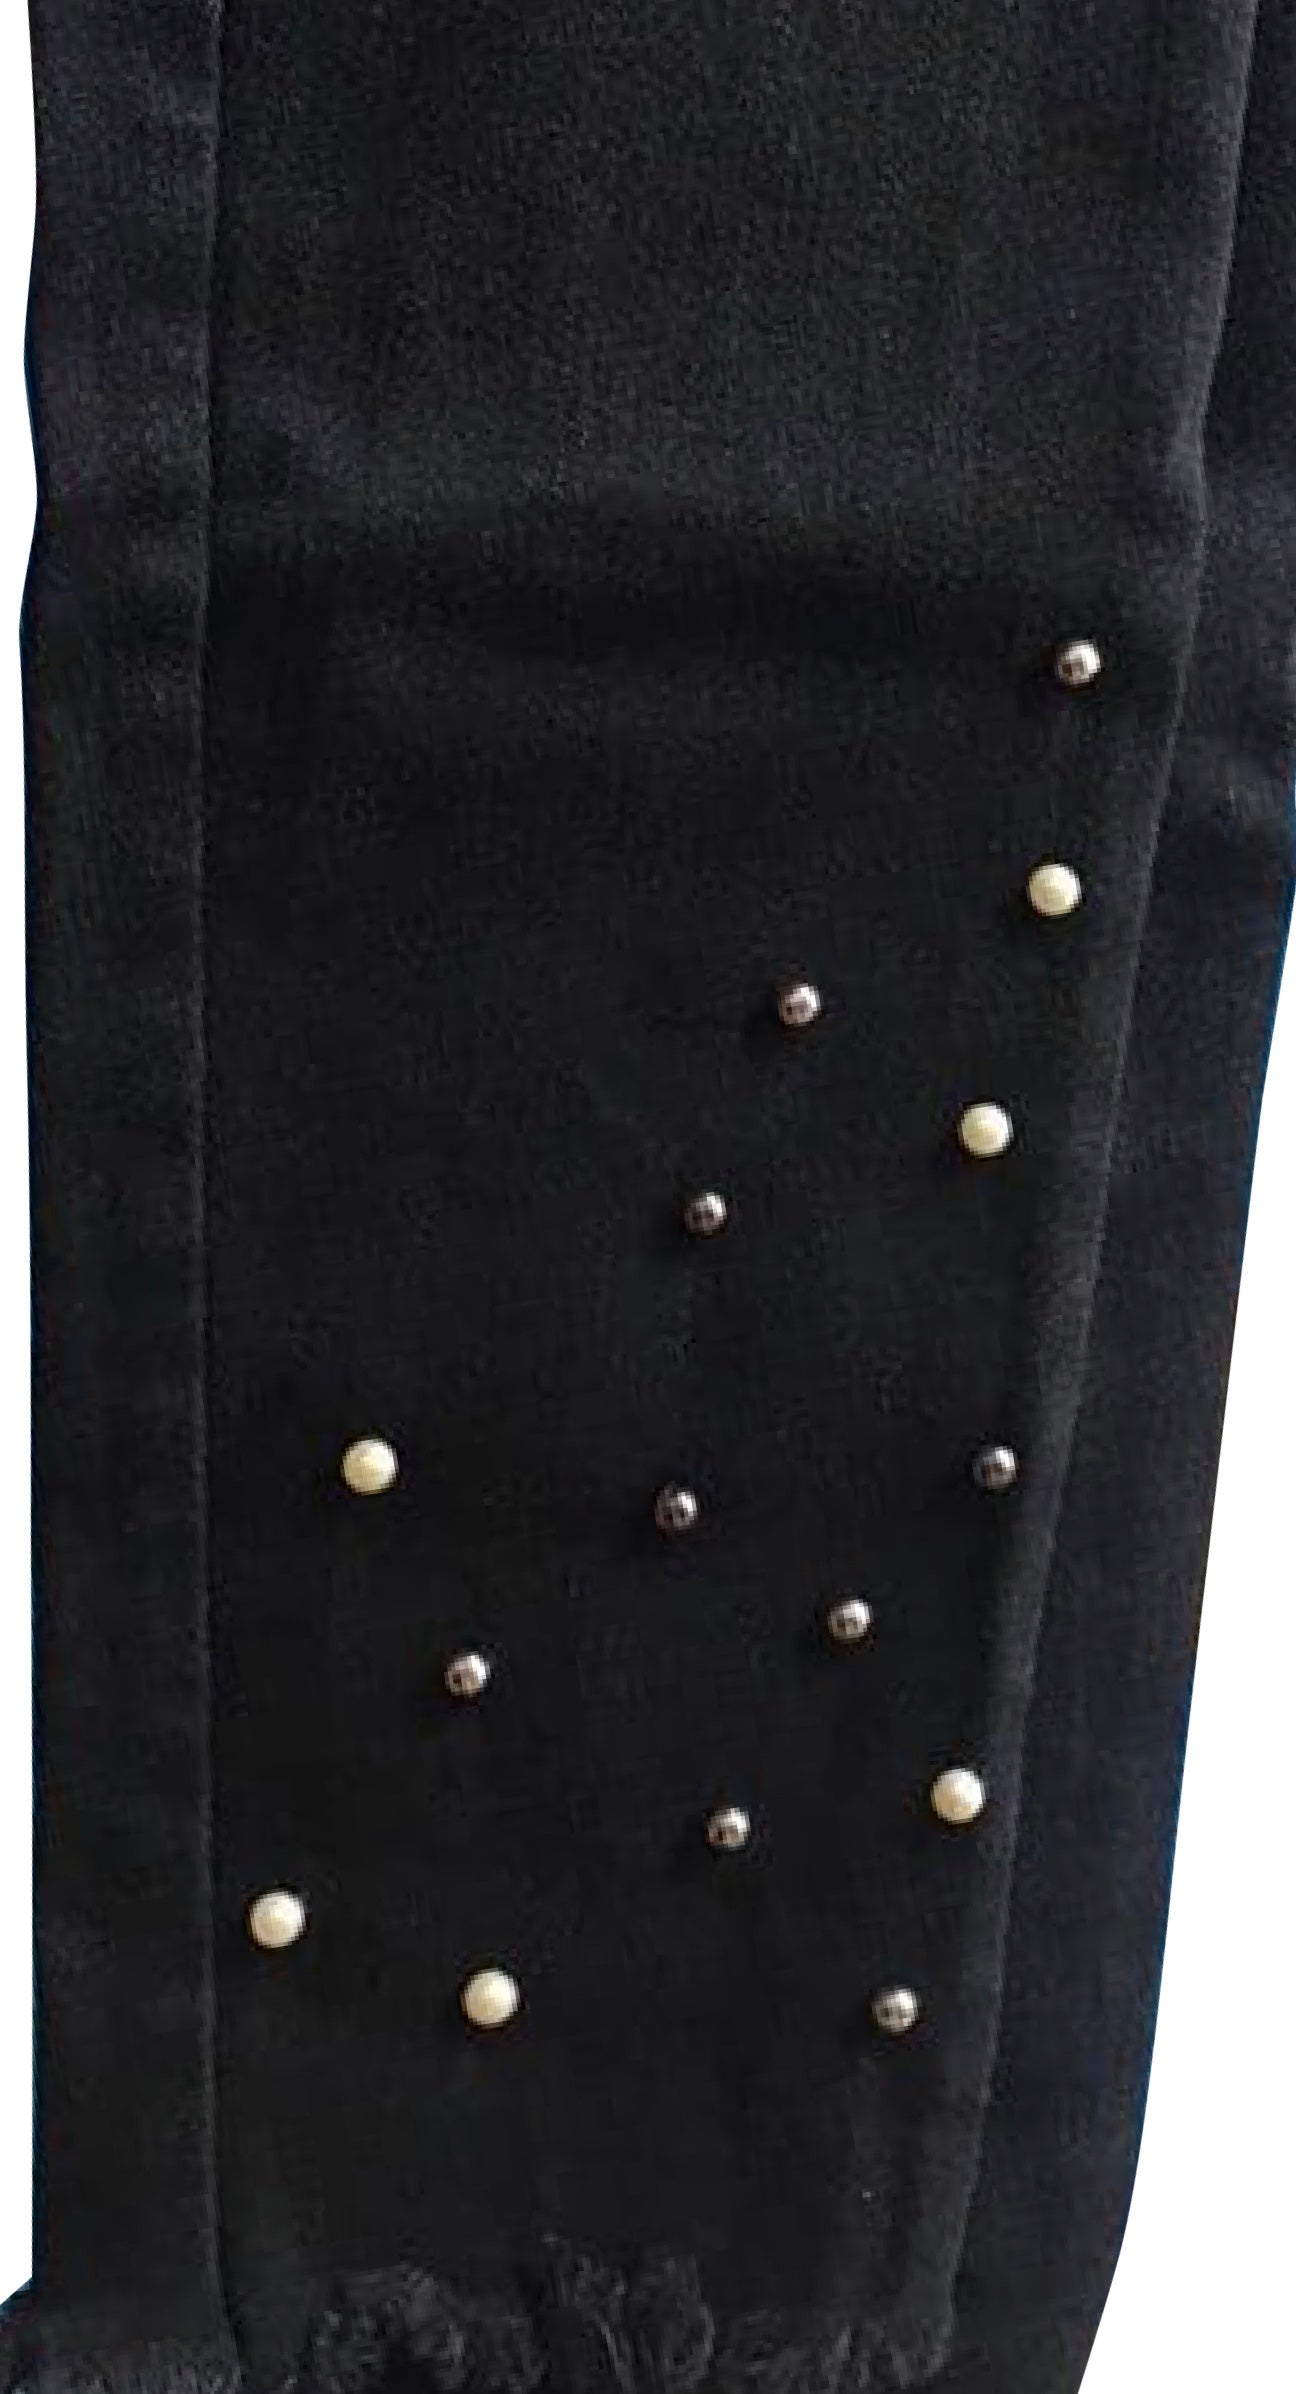 Ysabel Mora 70235 Pearl Jeggings - black denim jeans leggings with silver and pearl studs and frayed edge cuff